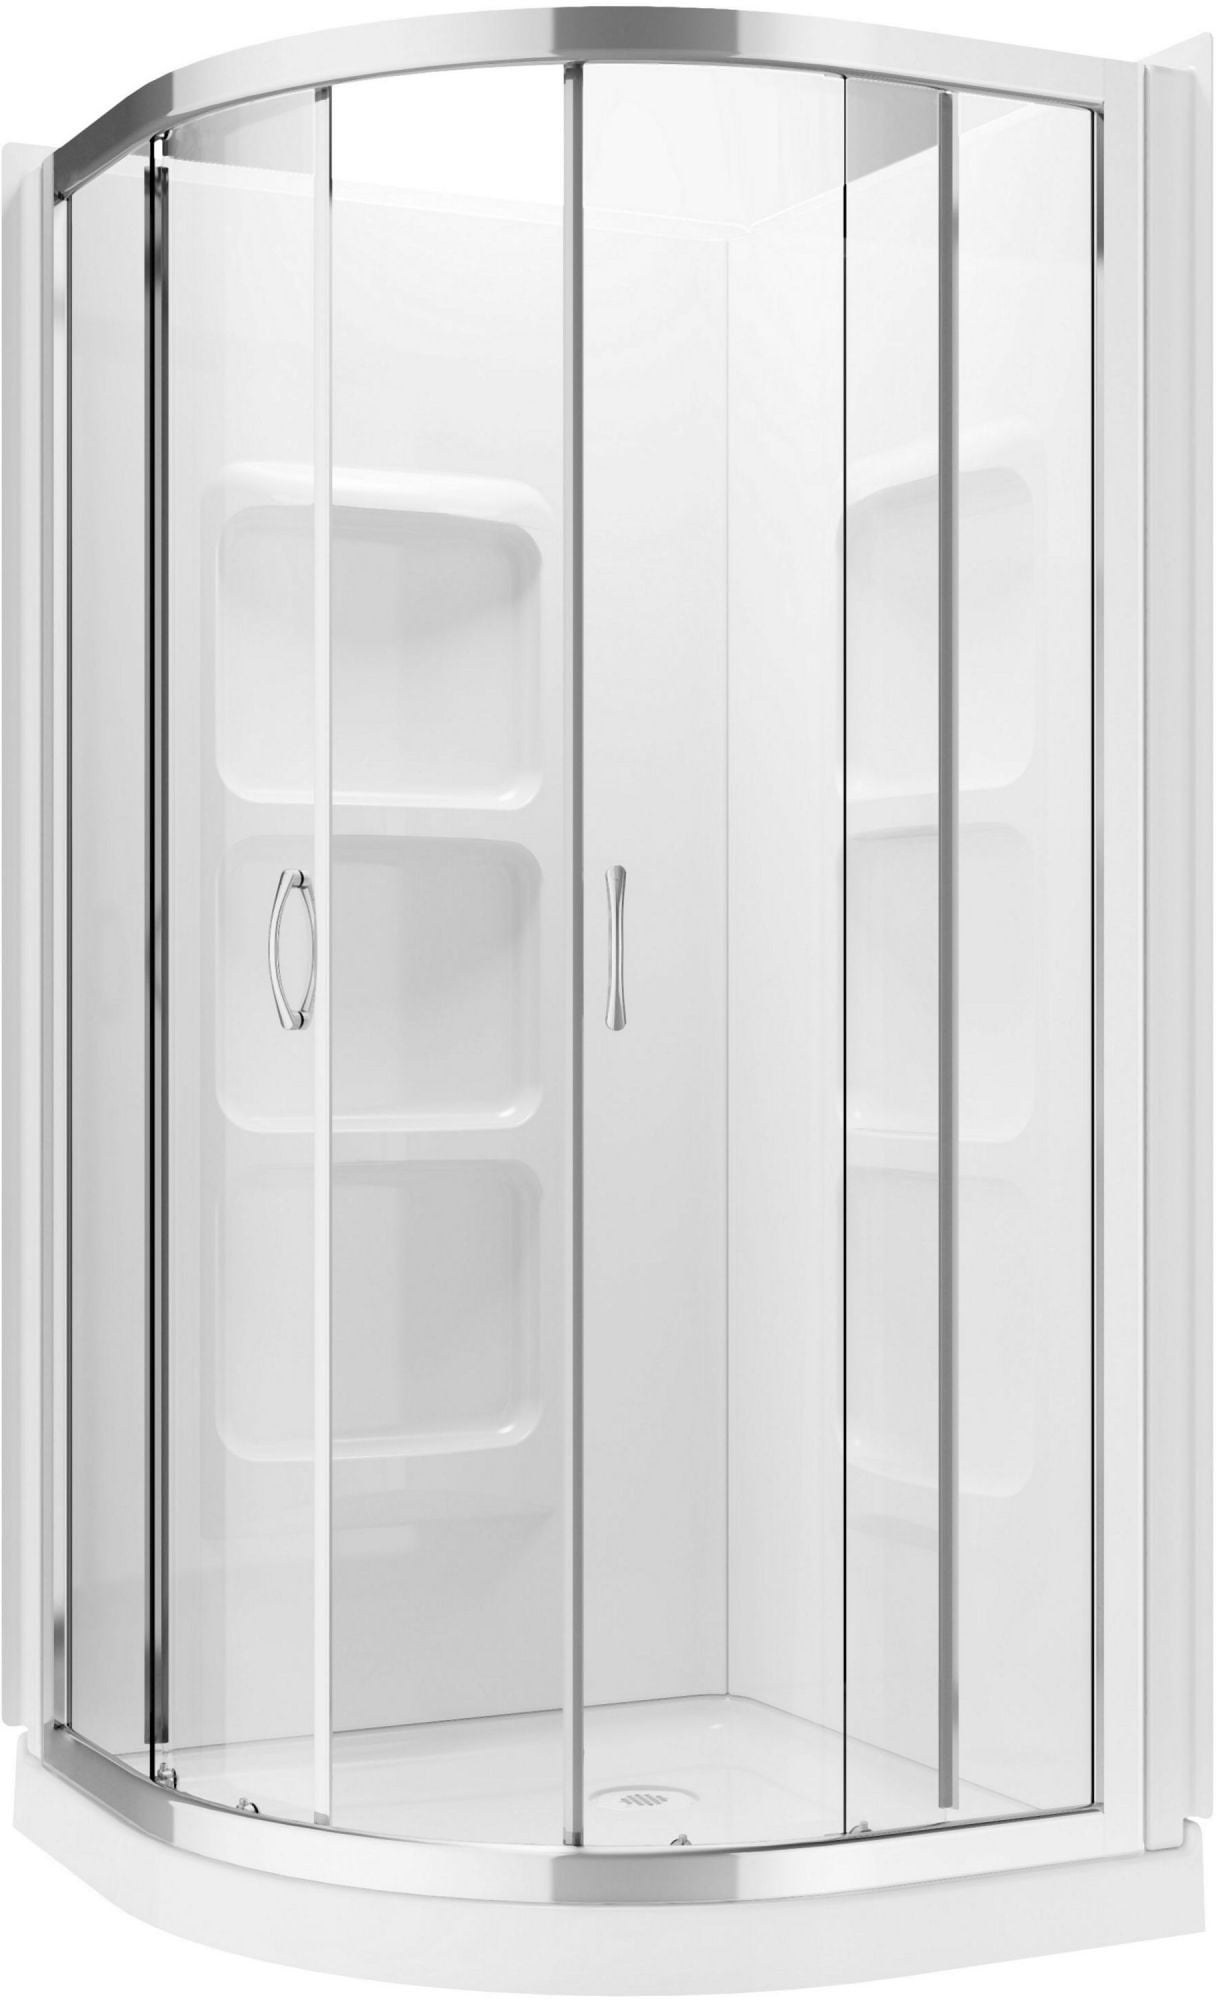 Picture of A&E Bath & Shower SK-NR38-KIT Mona Neo Round Shower Enclosure Kit with Acrylic Base & Walls